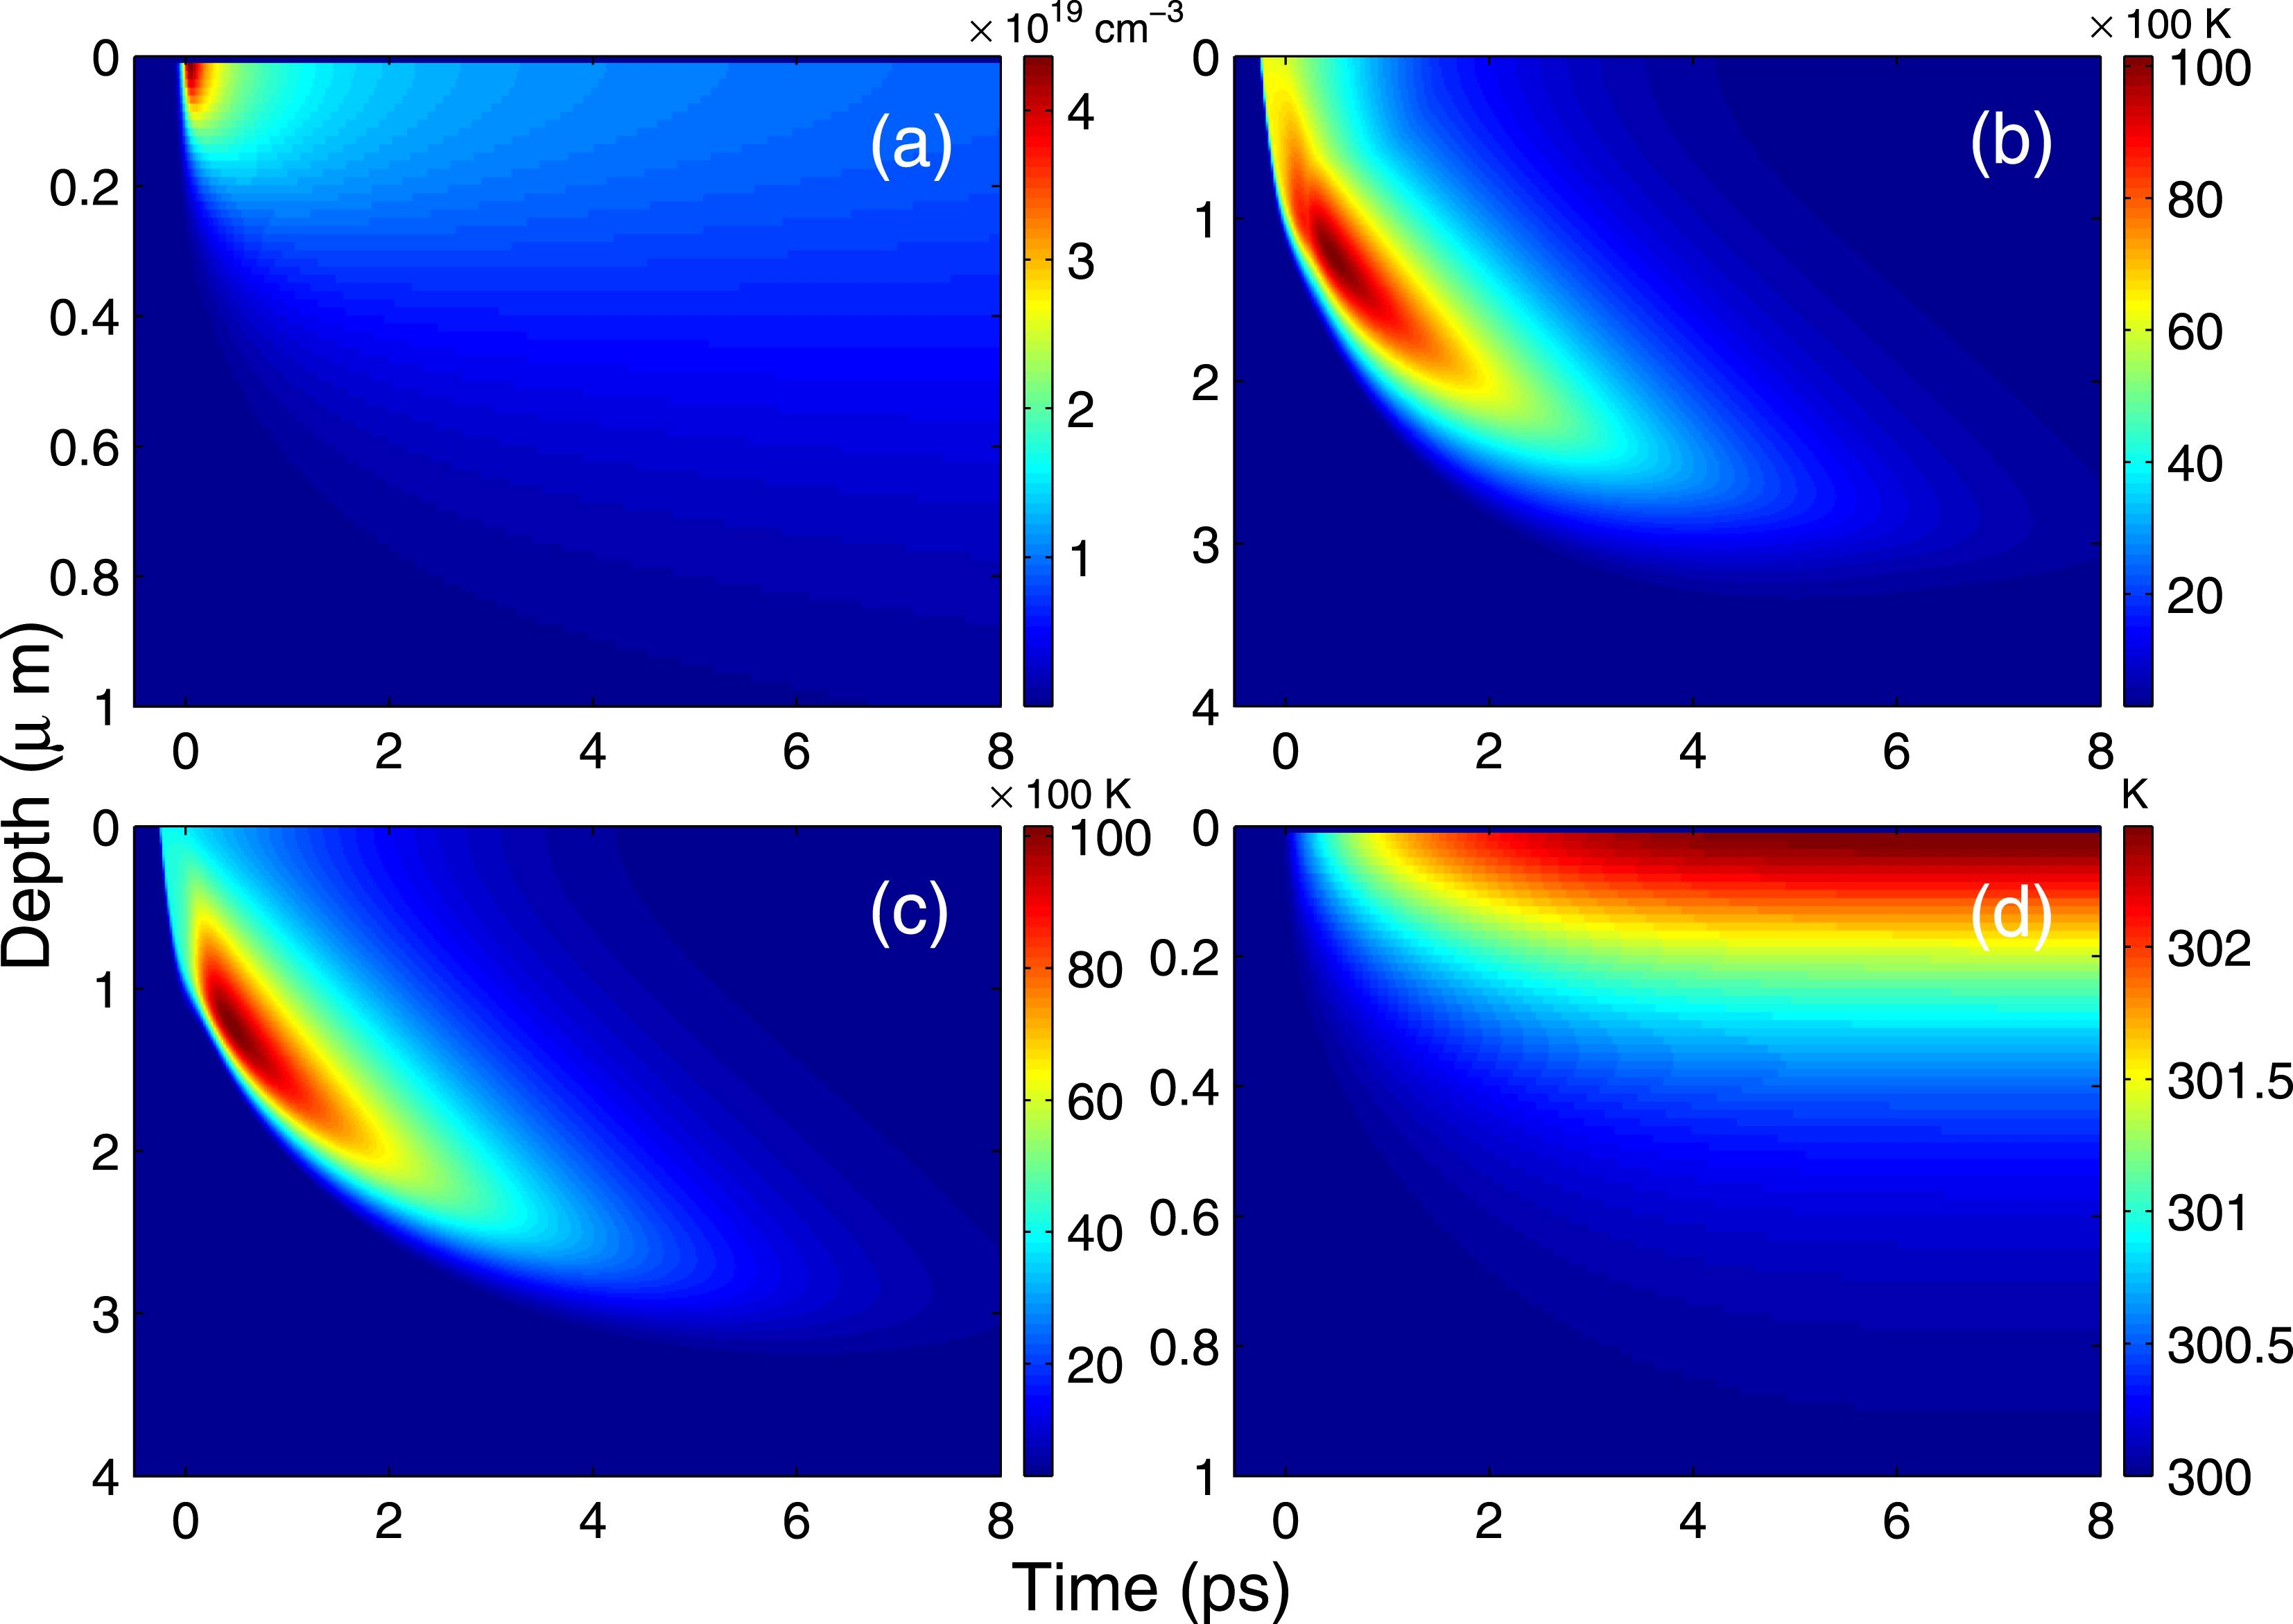 Time-space evolution of (a) $N$, (b) $T_{e}$, (c) $T_{h}$ and (d) $T_{l}$ in Ge irradiated by laser pulse whose duration, wavelength and fluence are 100 fs, 620 nm and $0.1~\text{mJ}/\text{cm}^{2}$, respectively.